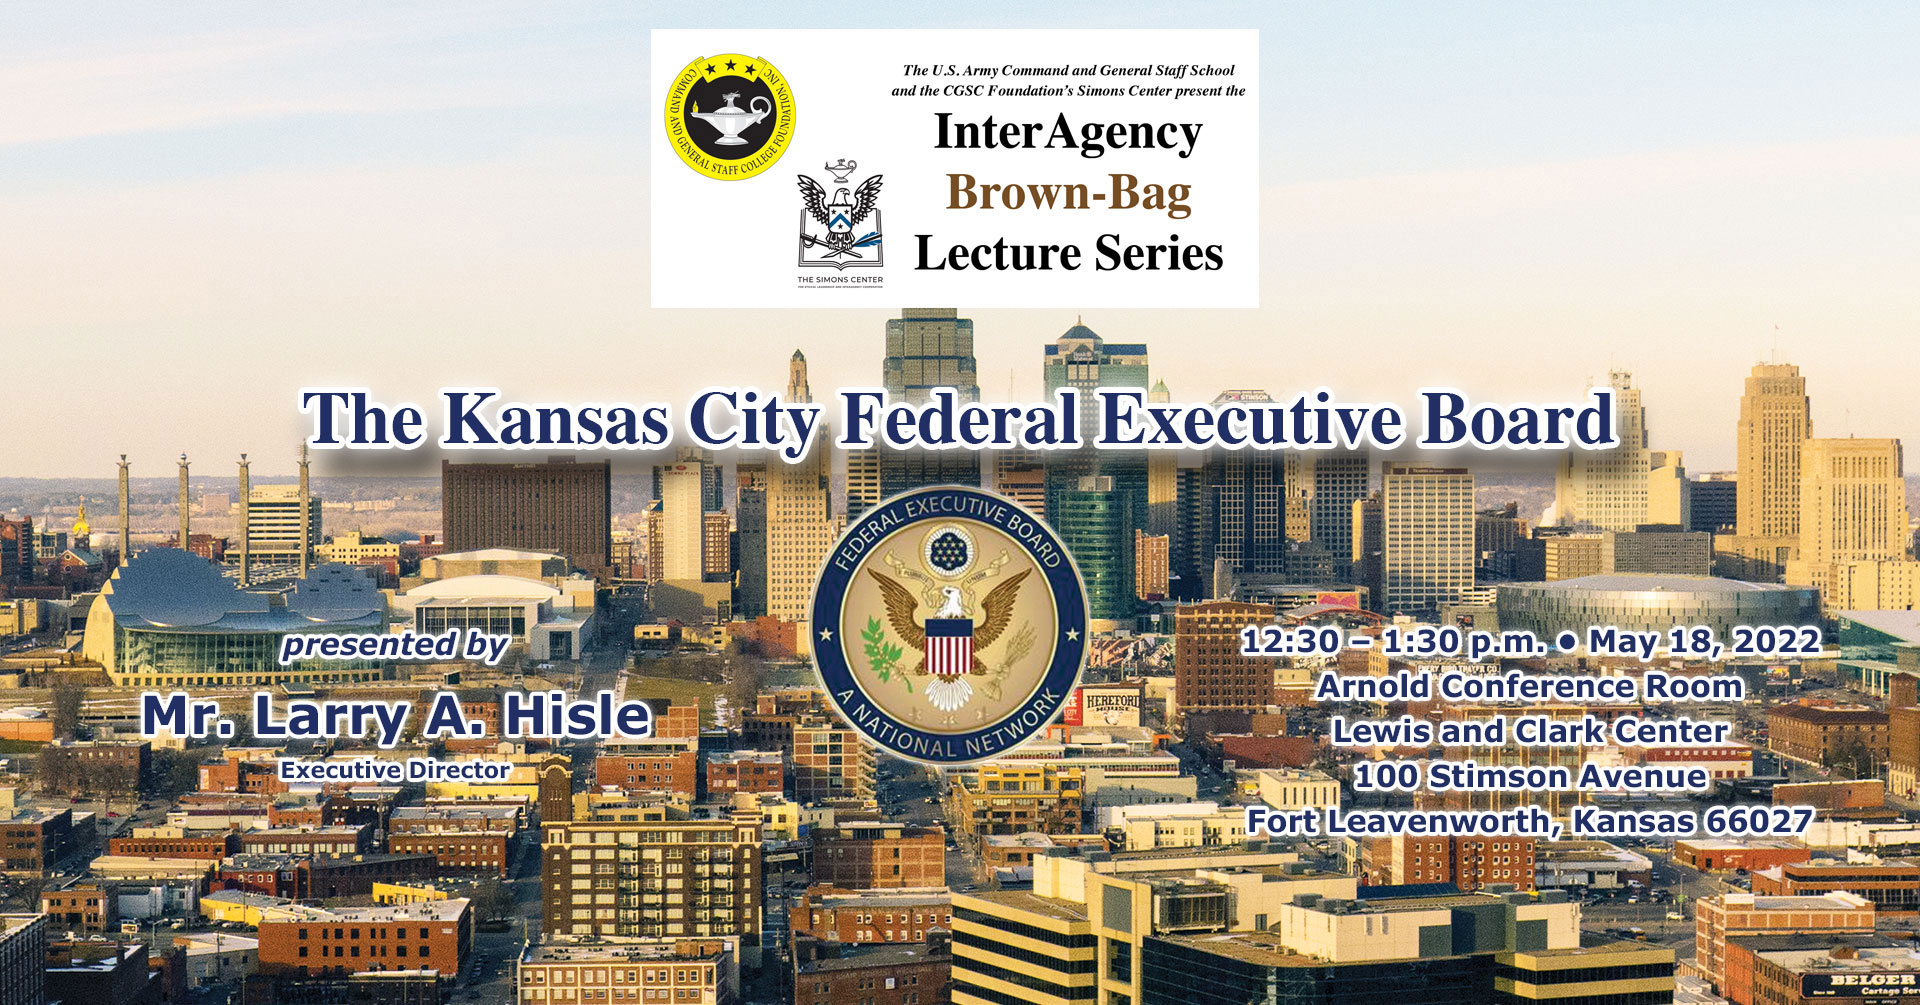 A background photo of the Kansas City skyline overplayed with the InterAgency Brown-Bag Lecture logo at top with subject and date of upcoming lecture in text below.